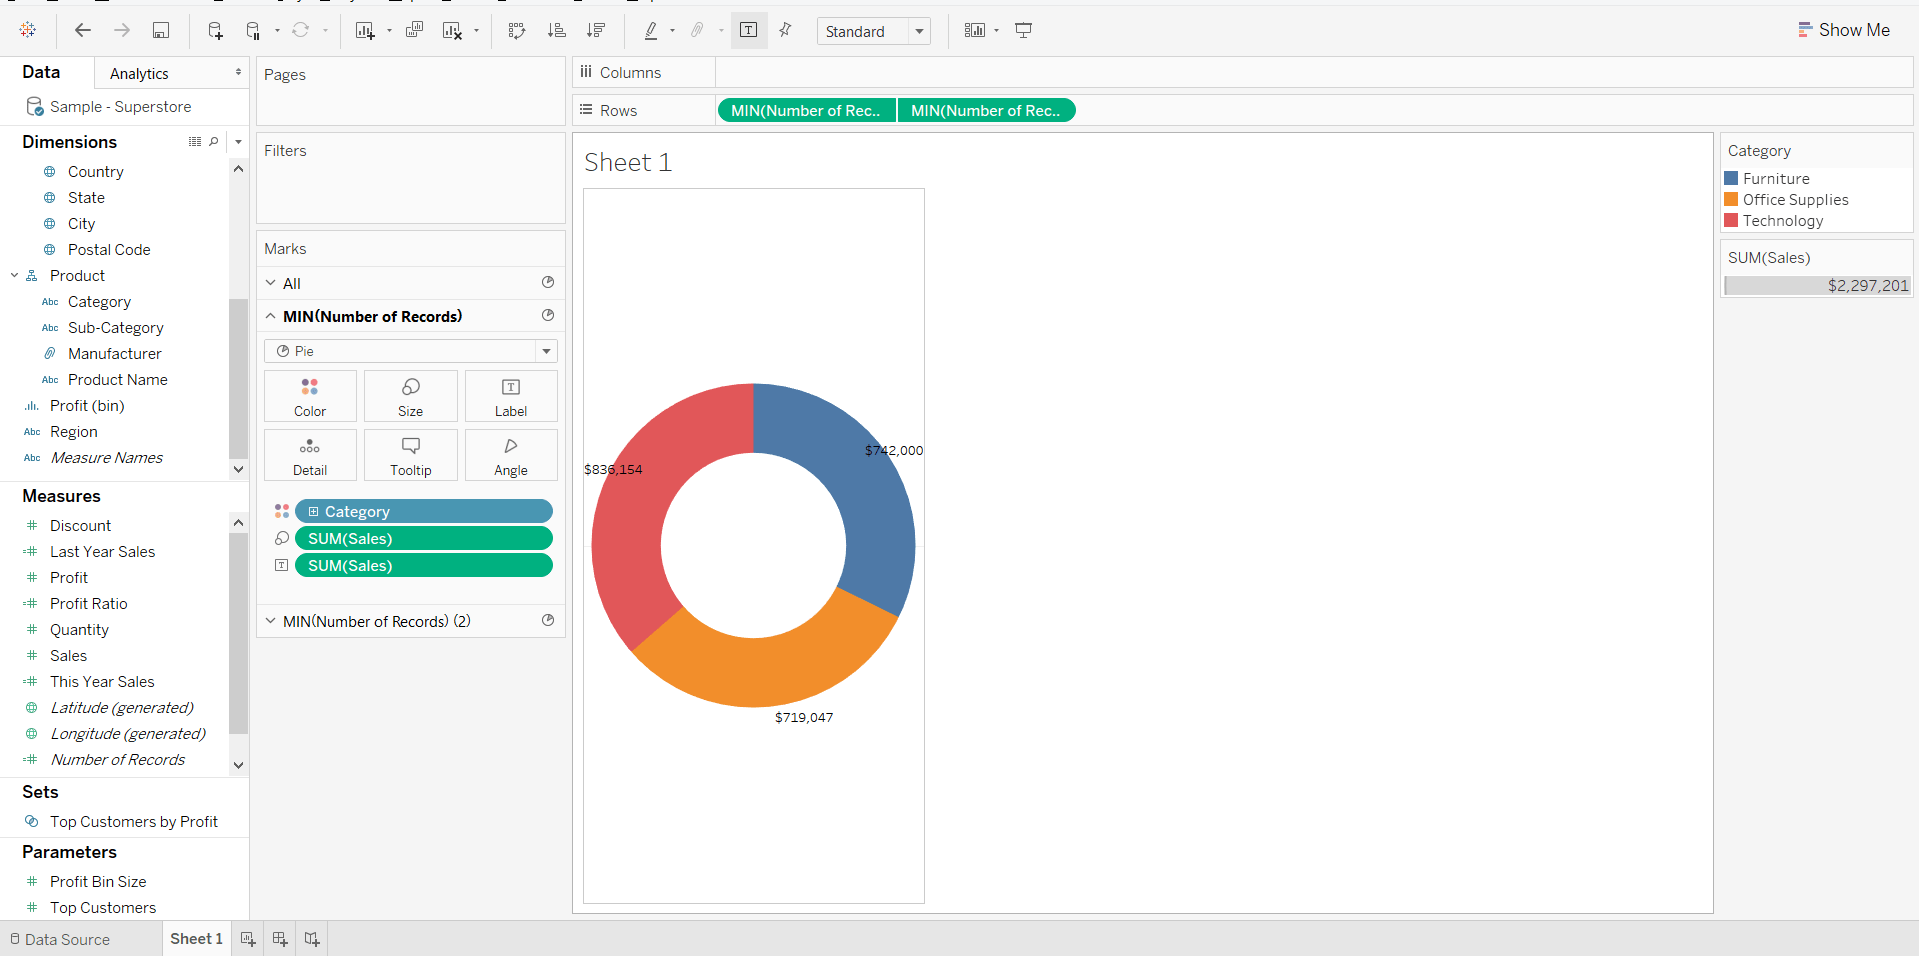 How to Make A Donut Chart in Tableau - AbsentData